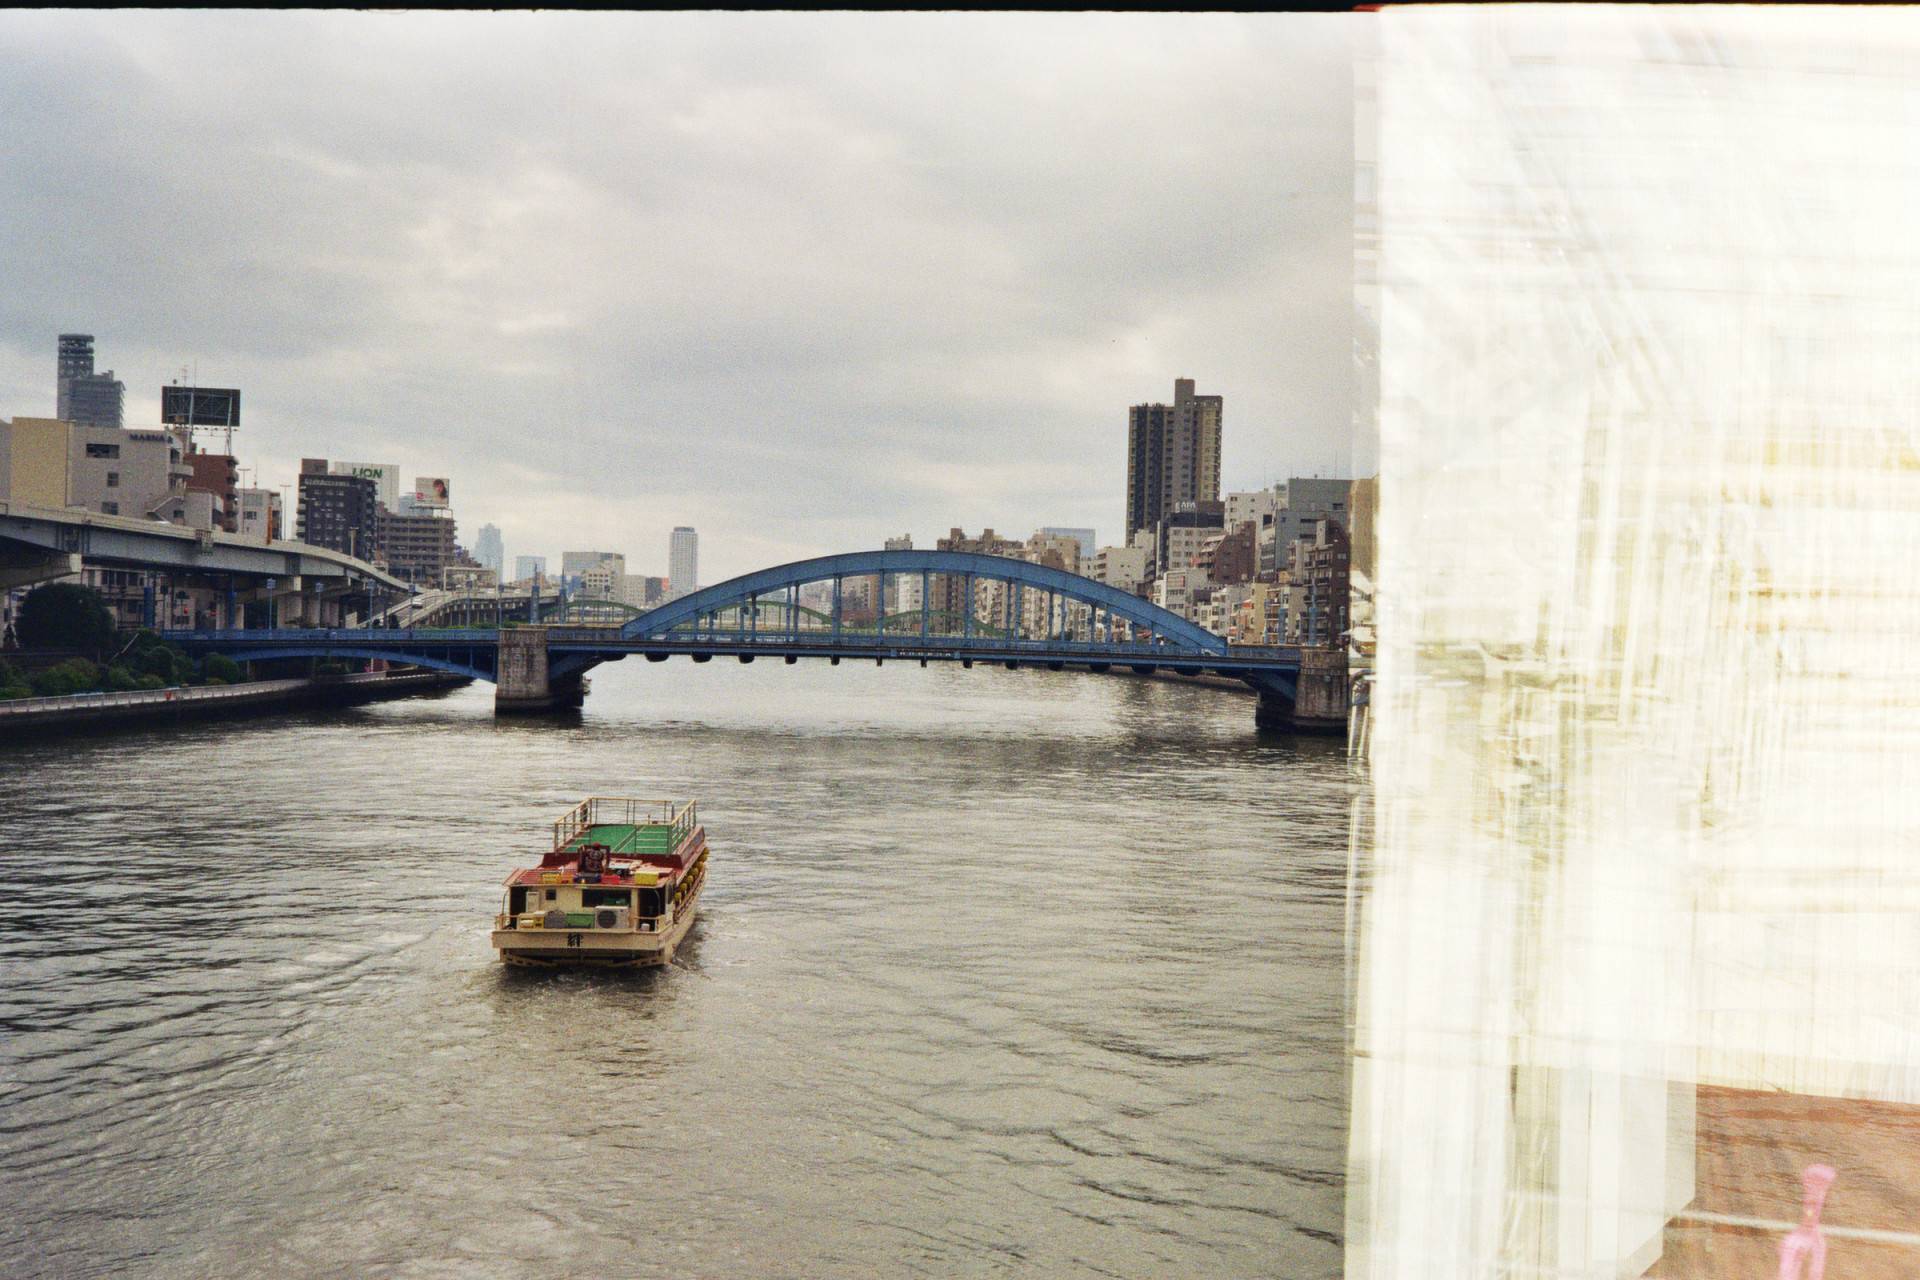 a small boat cruising along the river approaching the underpass below the bridge, river is surrounded with buildings, right side of the image has white artefacts from the burnt film